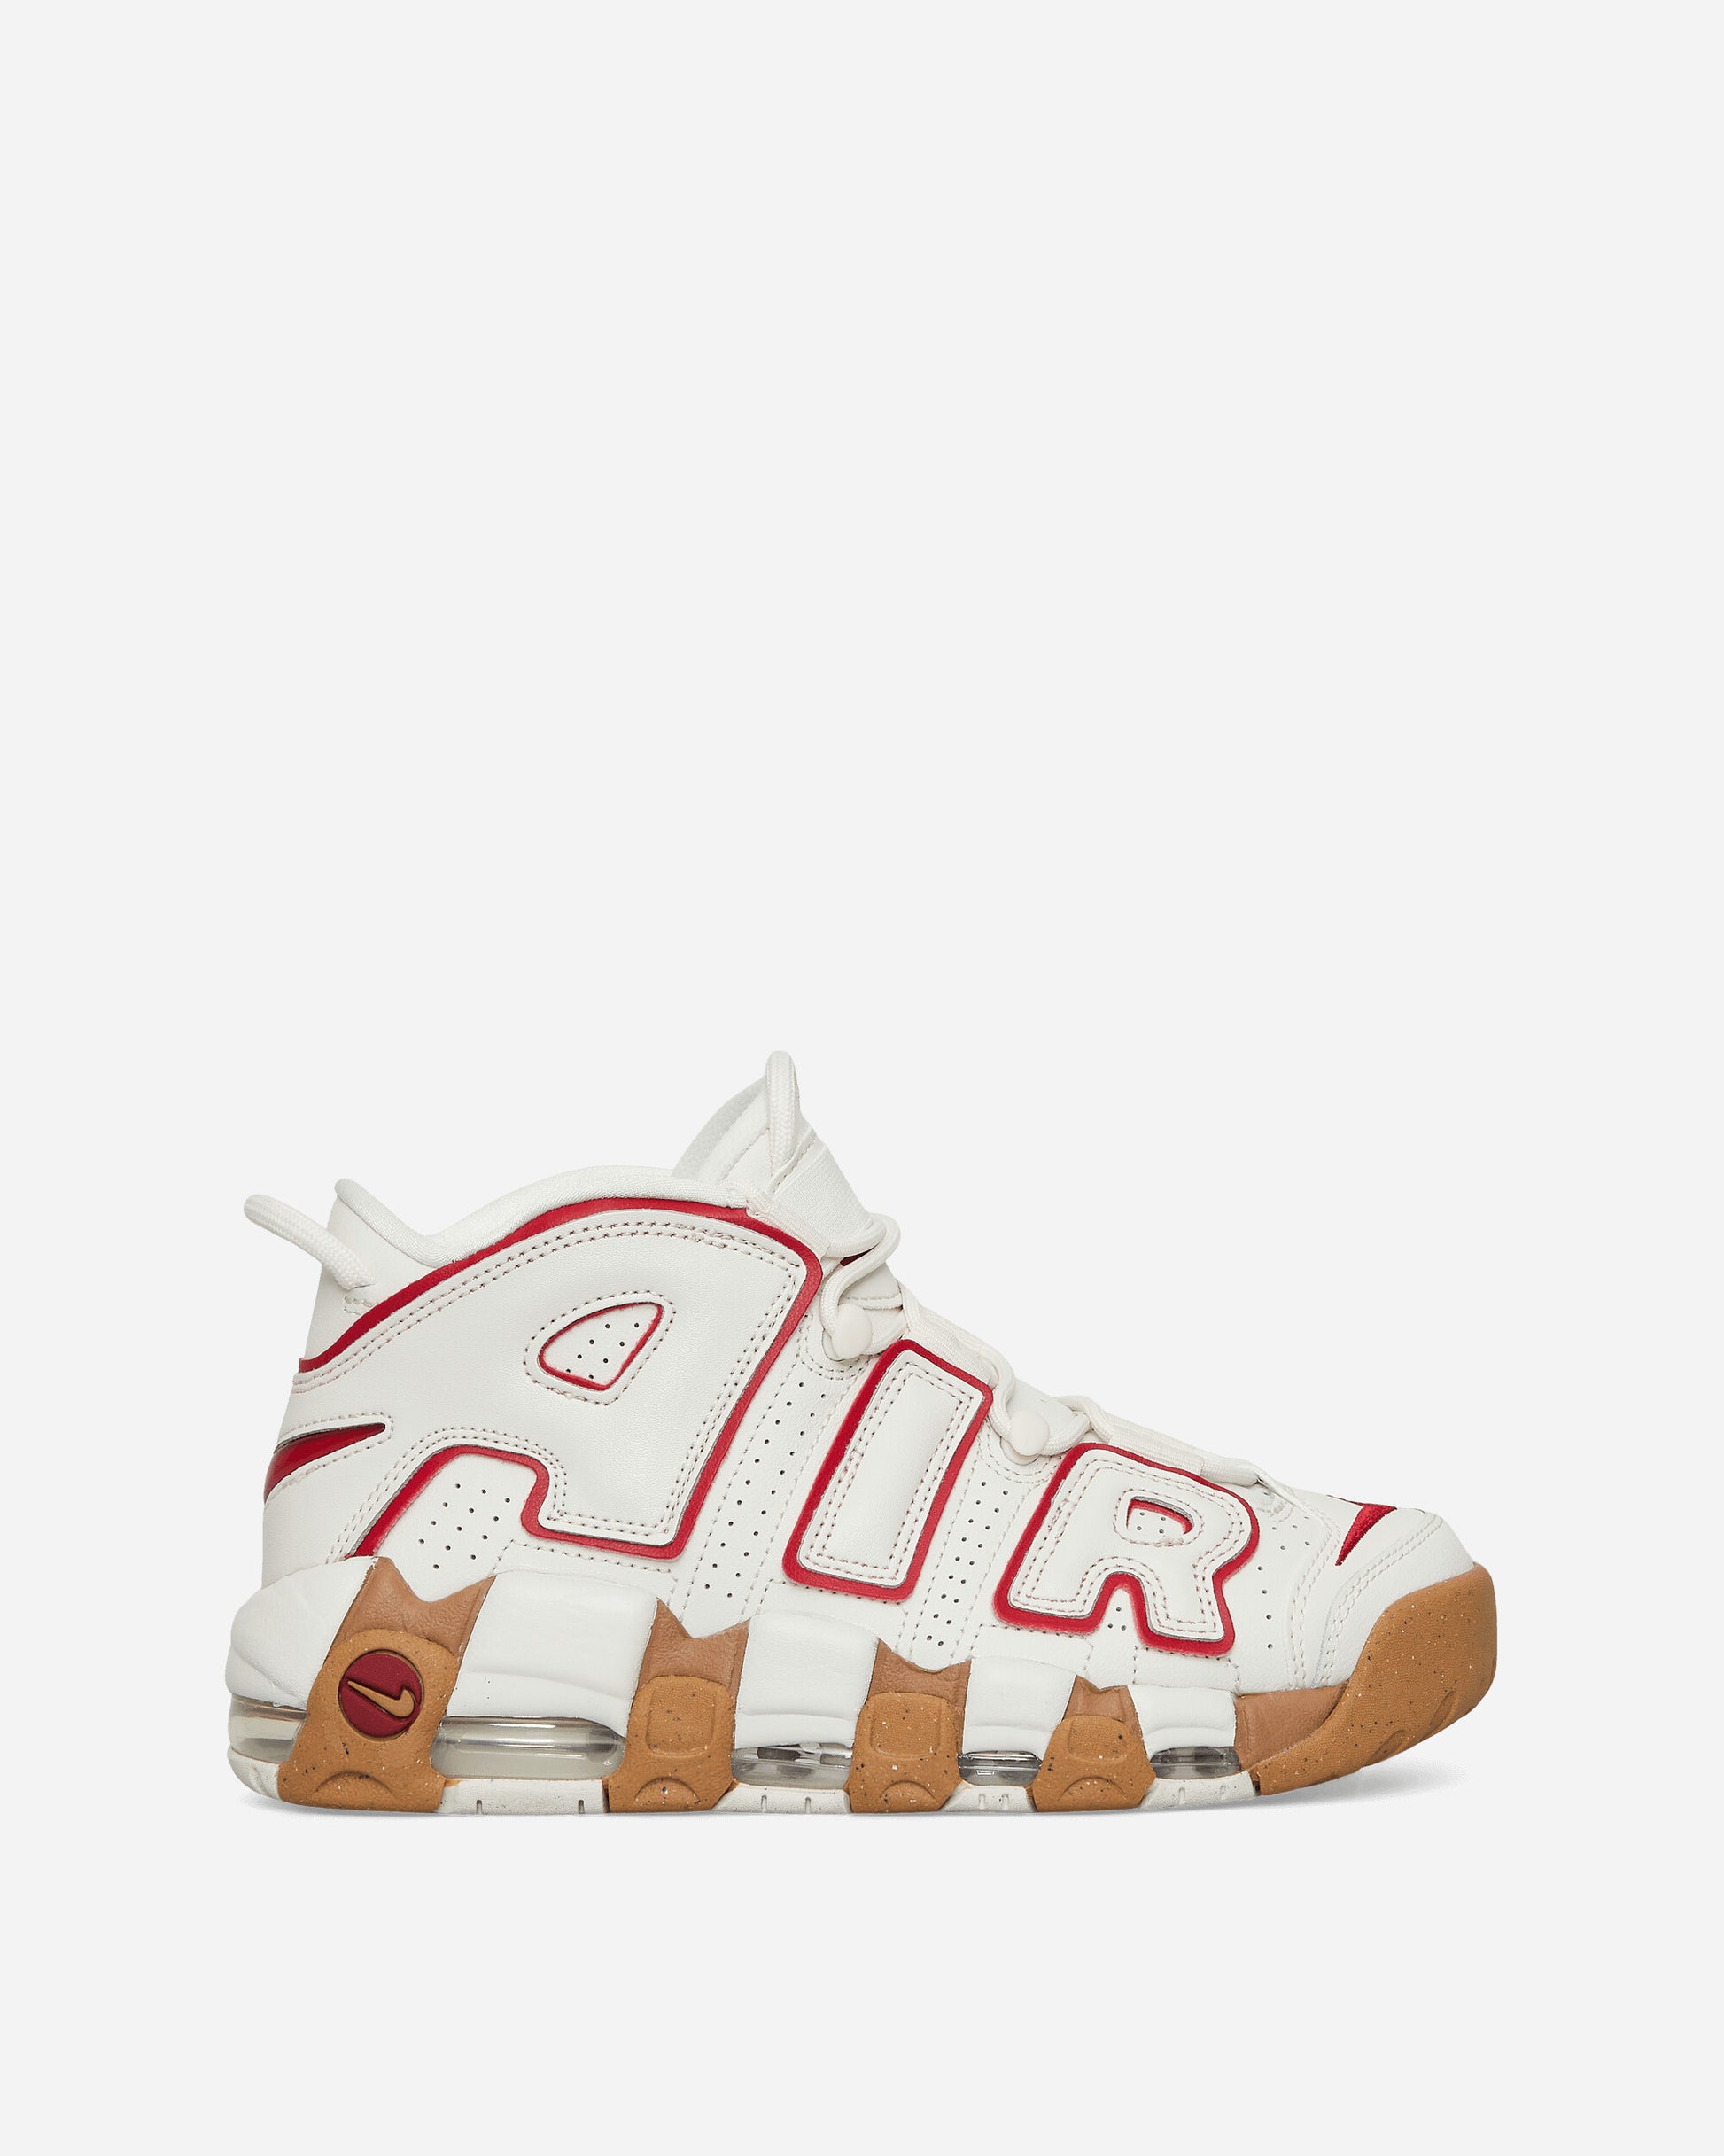 Nike Wmns Air More Uptempo Phantom/Gym Red Sneakers Mid DV1137-002